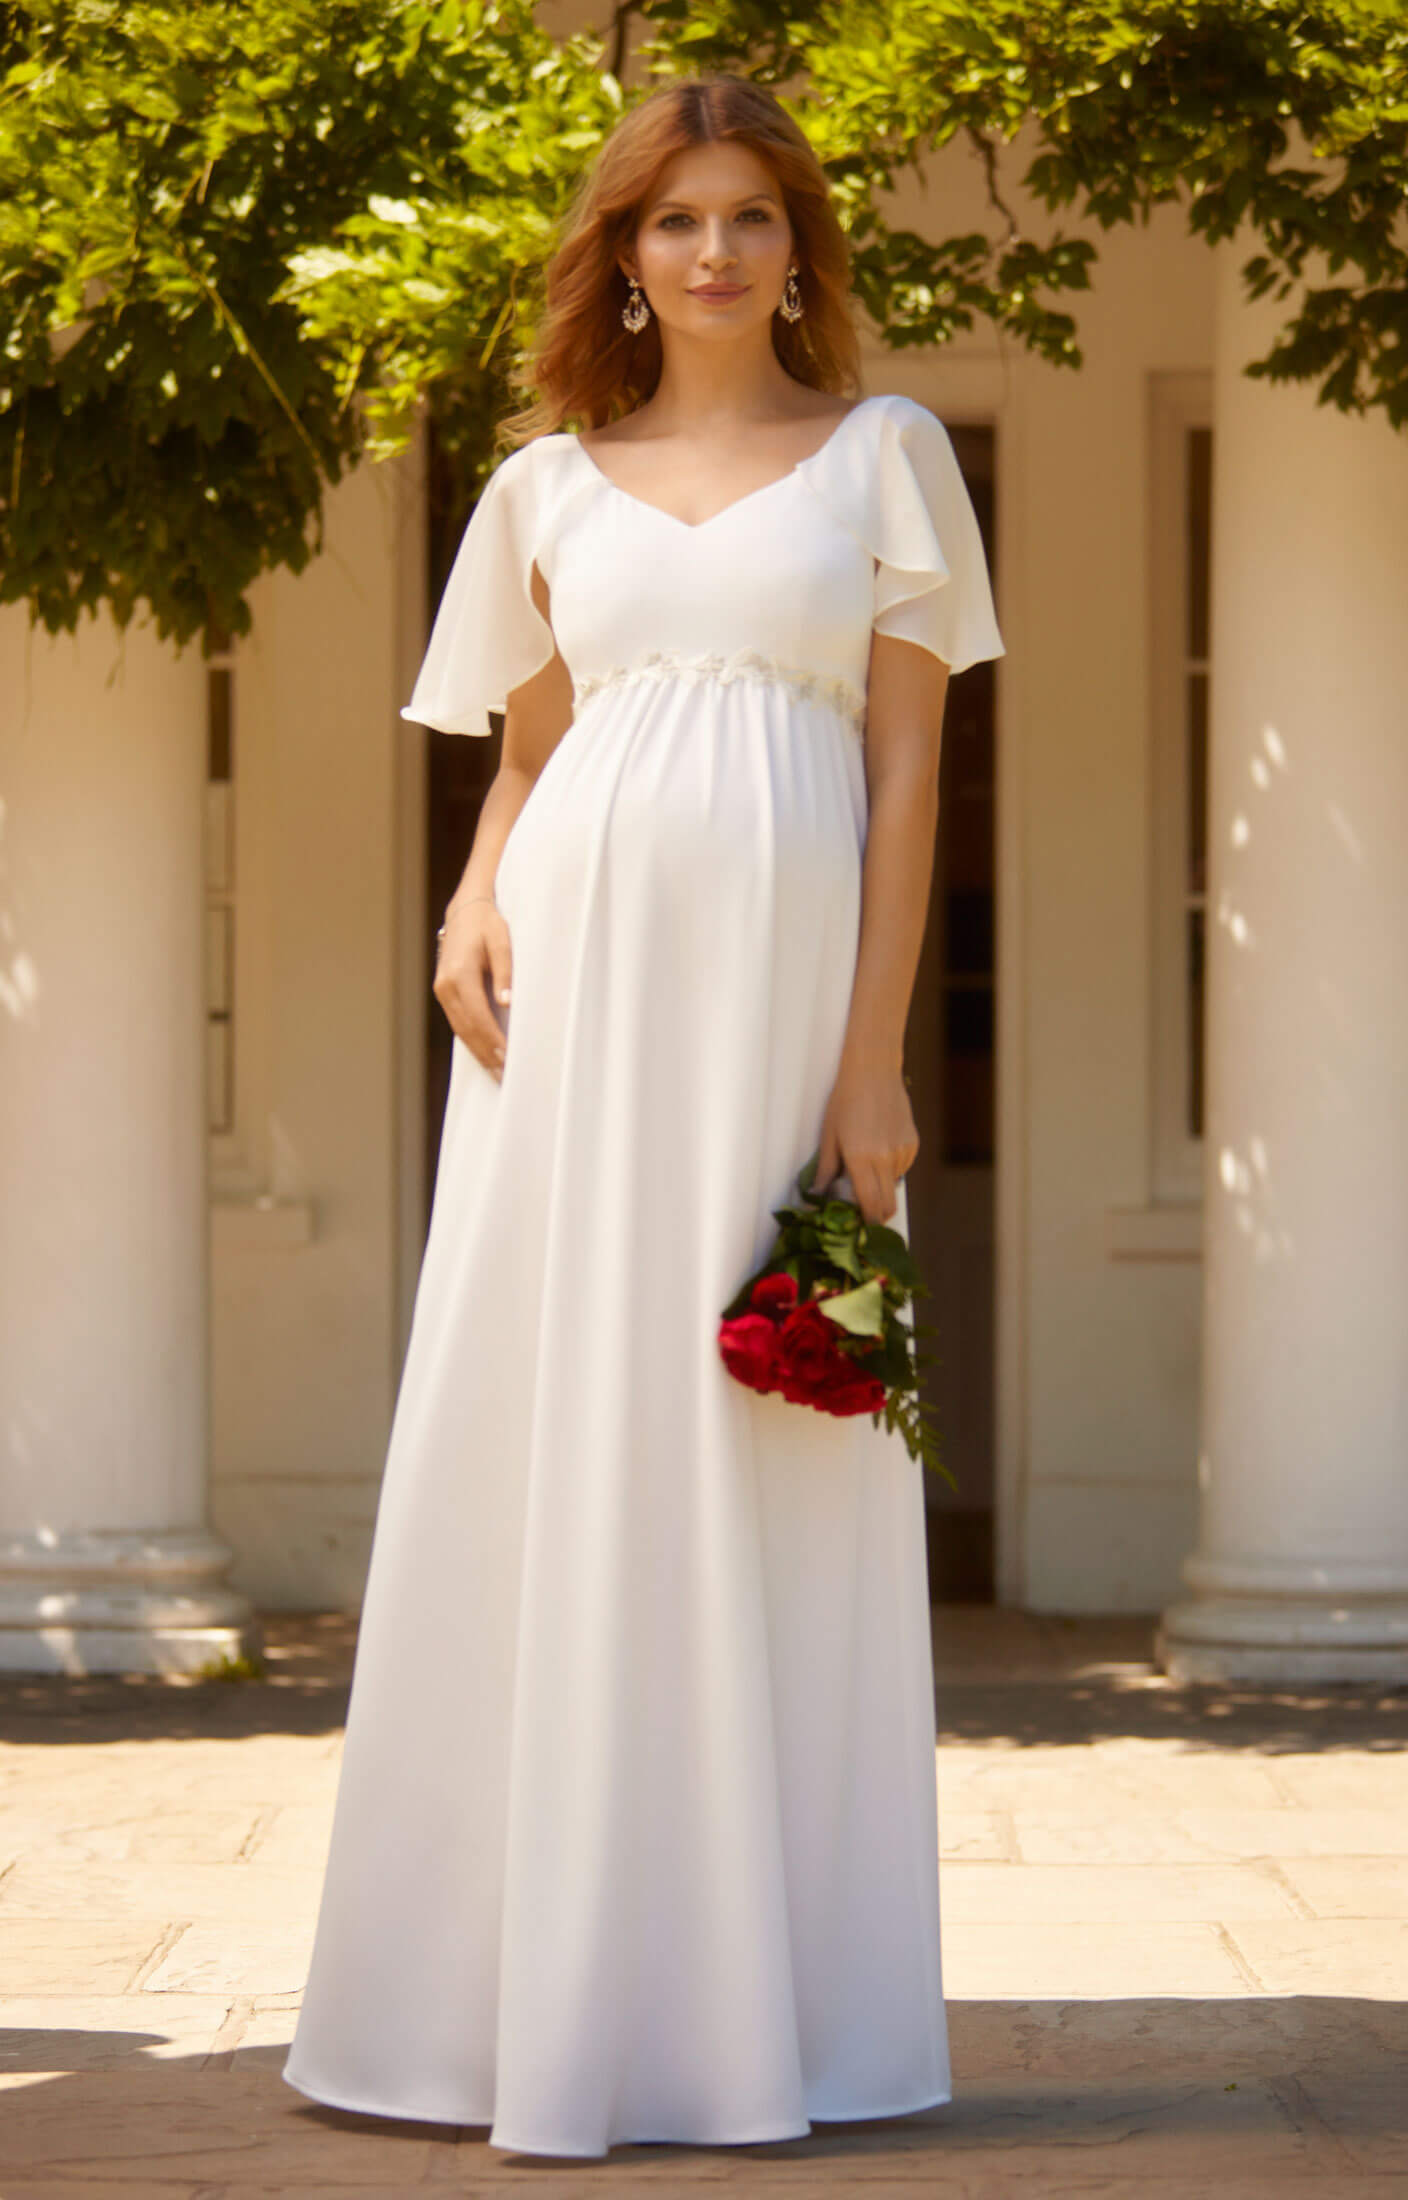 Top Wedding Dresses Pregnant of all time The ultimate guide 